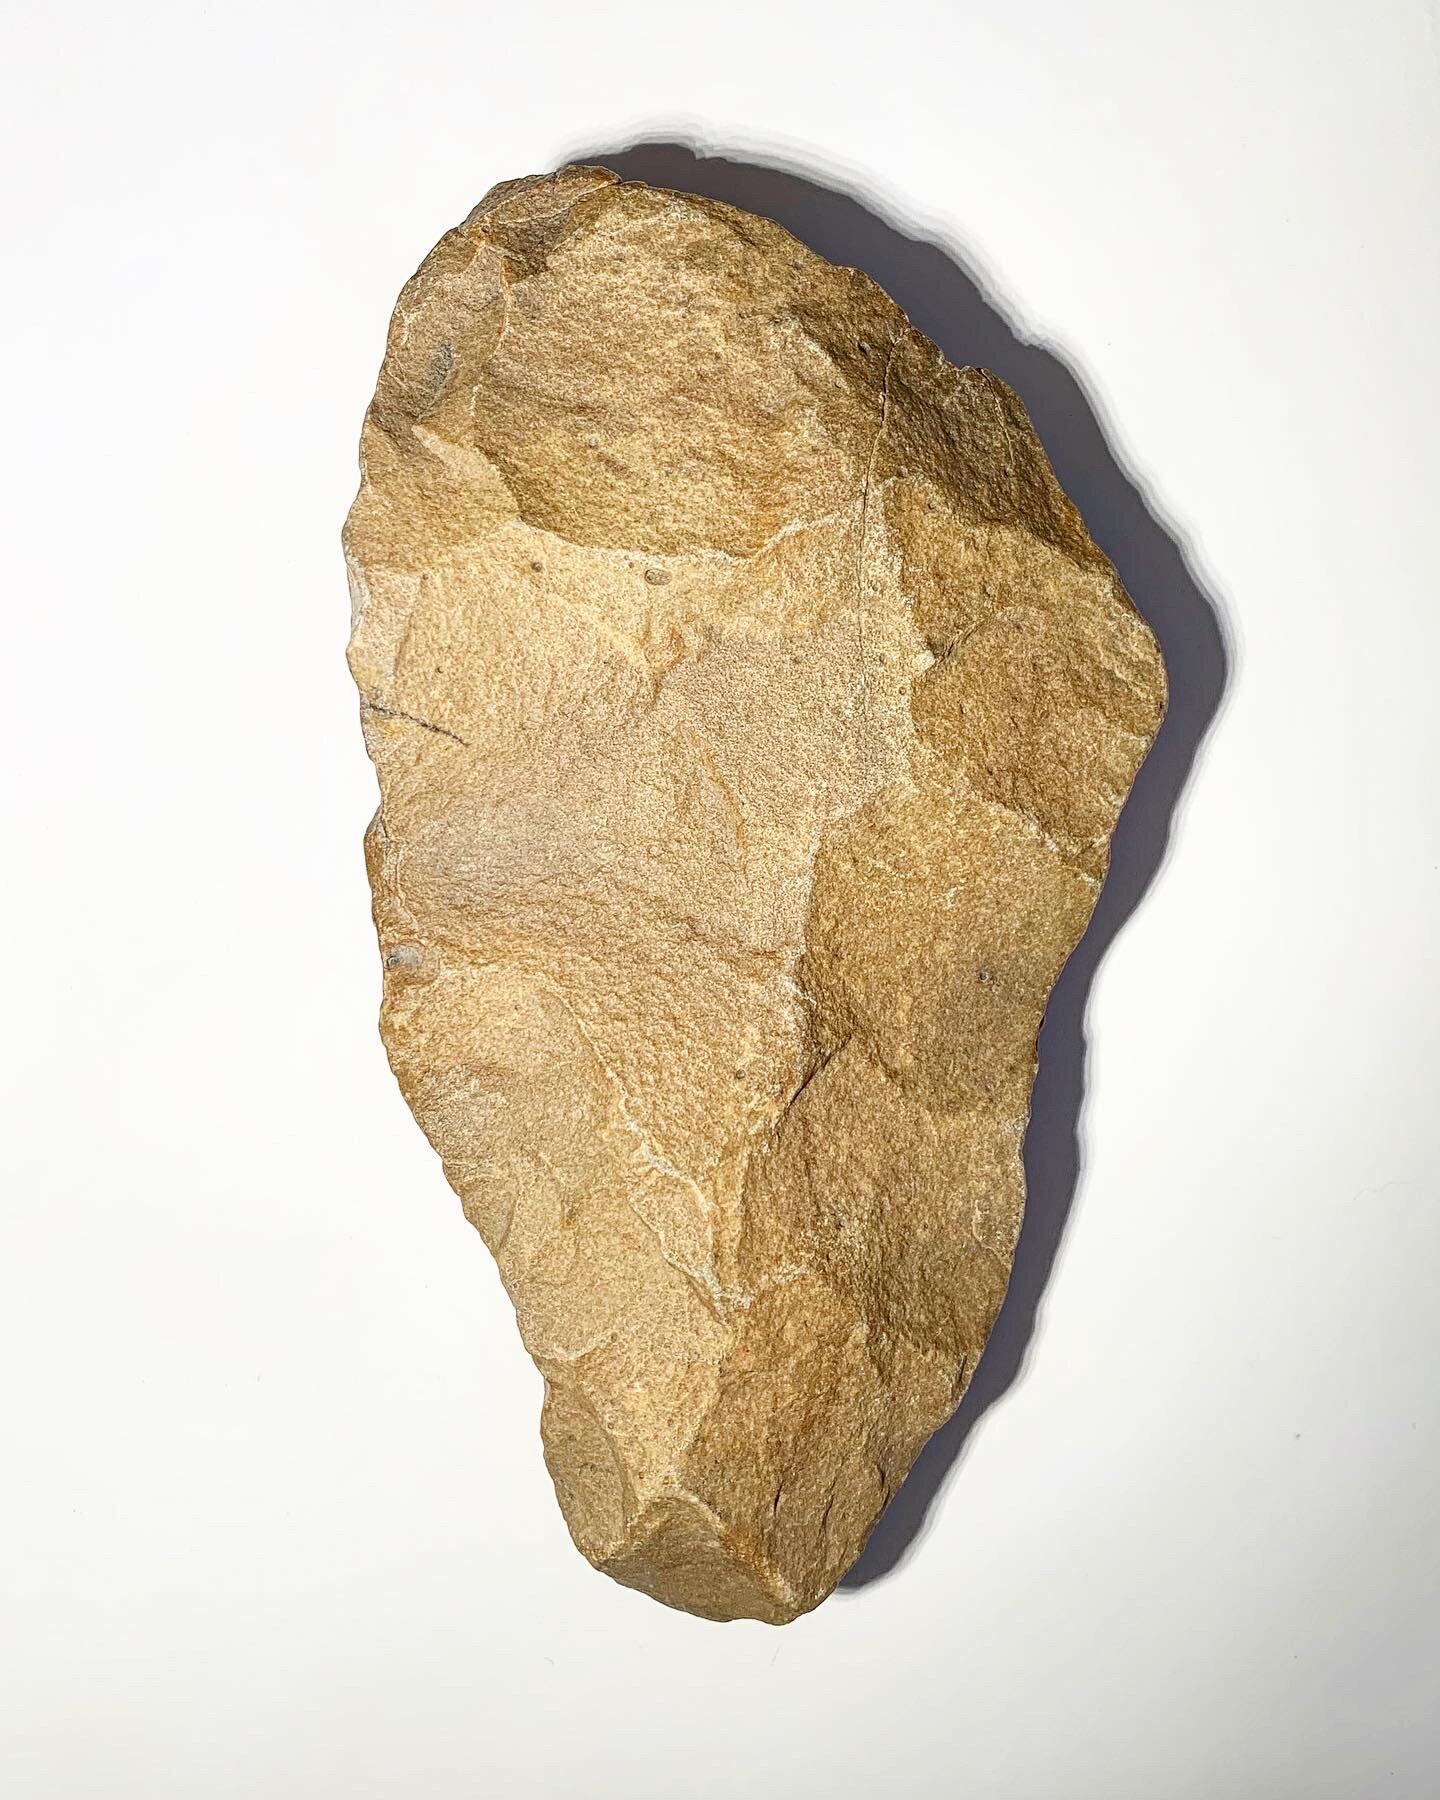 Neolithic carving tool from Morocco, Circa 10,000 years old.

Collectibles. From rare dinosaur skulls and Stone Age tools to the world’s earliest animals that date back millions of years, the Extraordinary Objects collection of natural history and